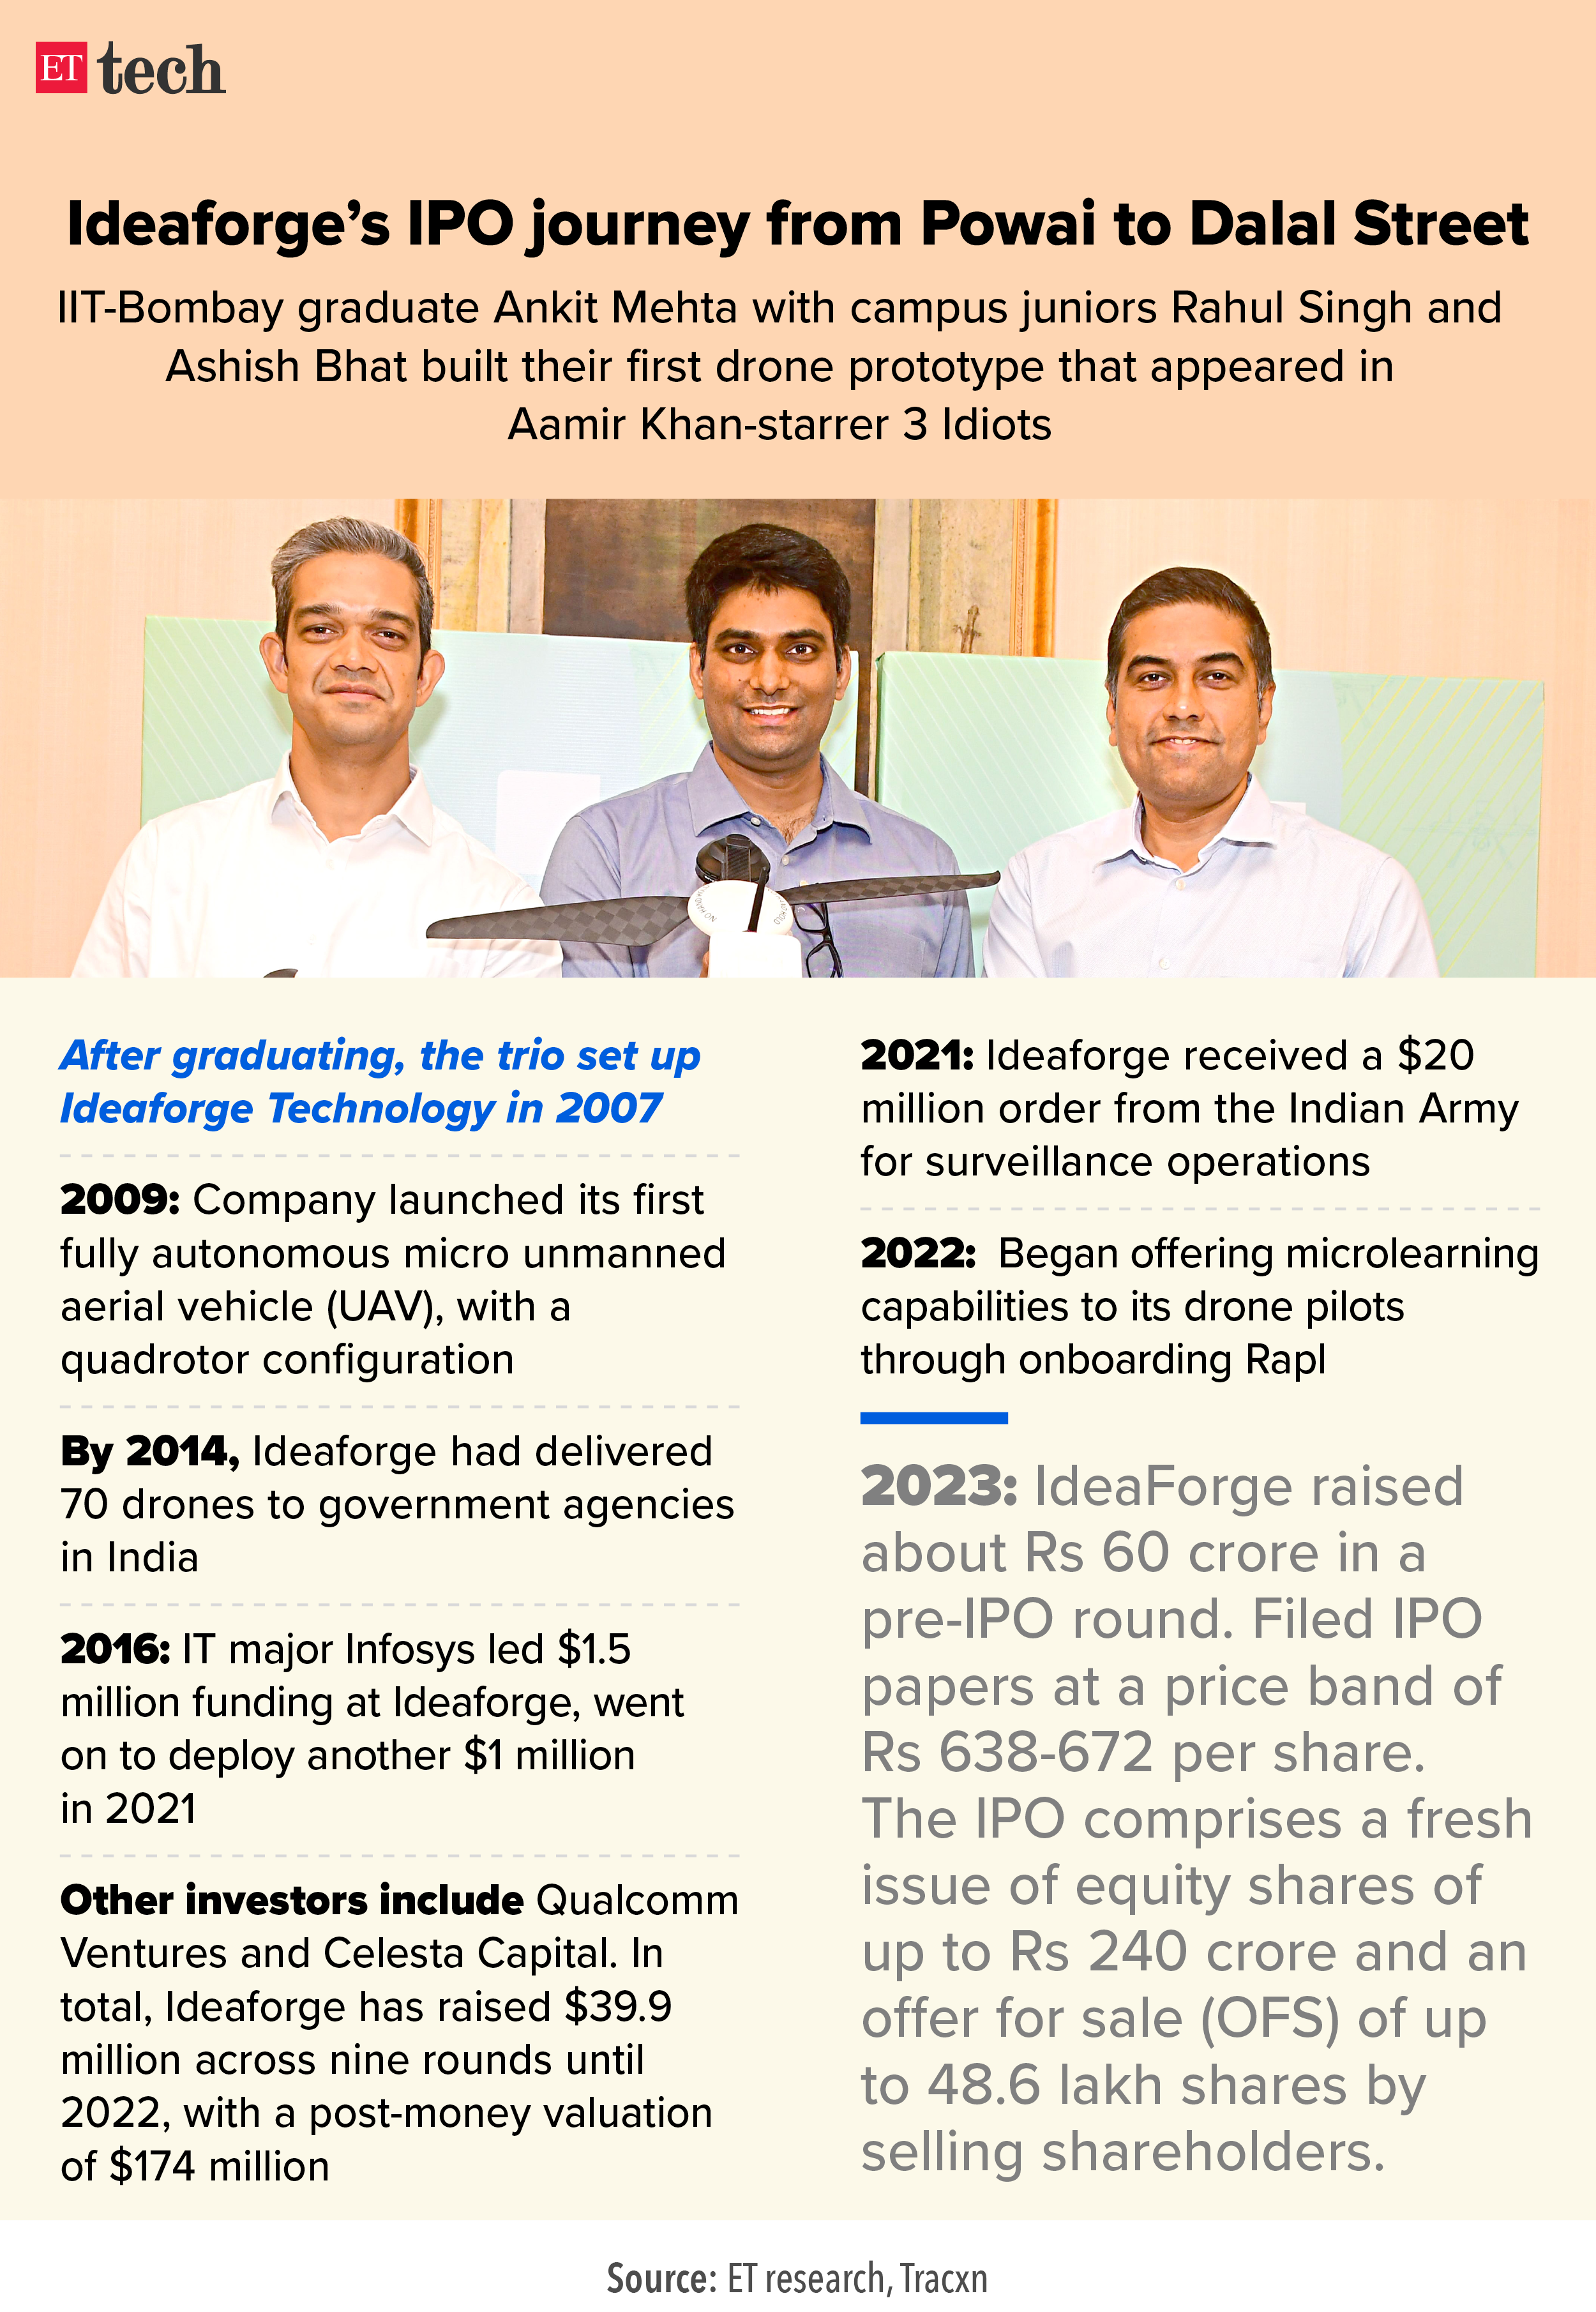 Ideaforge IPO journey from Powai to Dalal Street